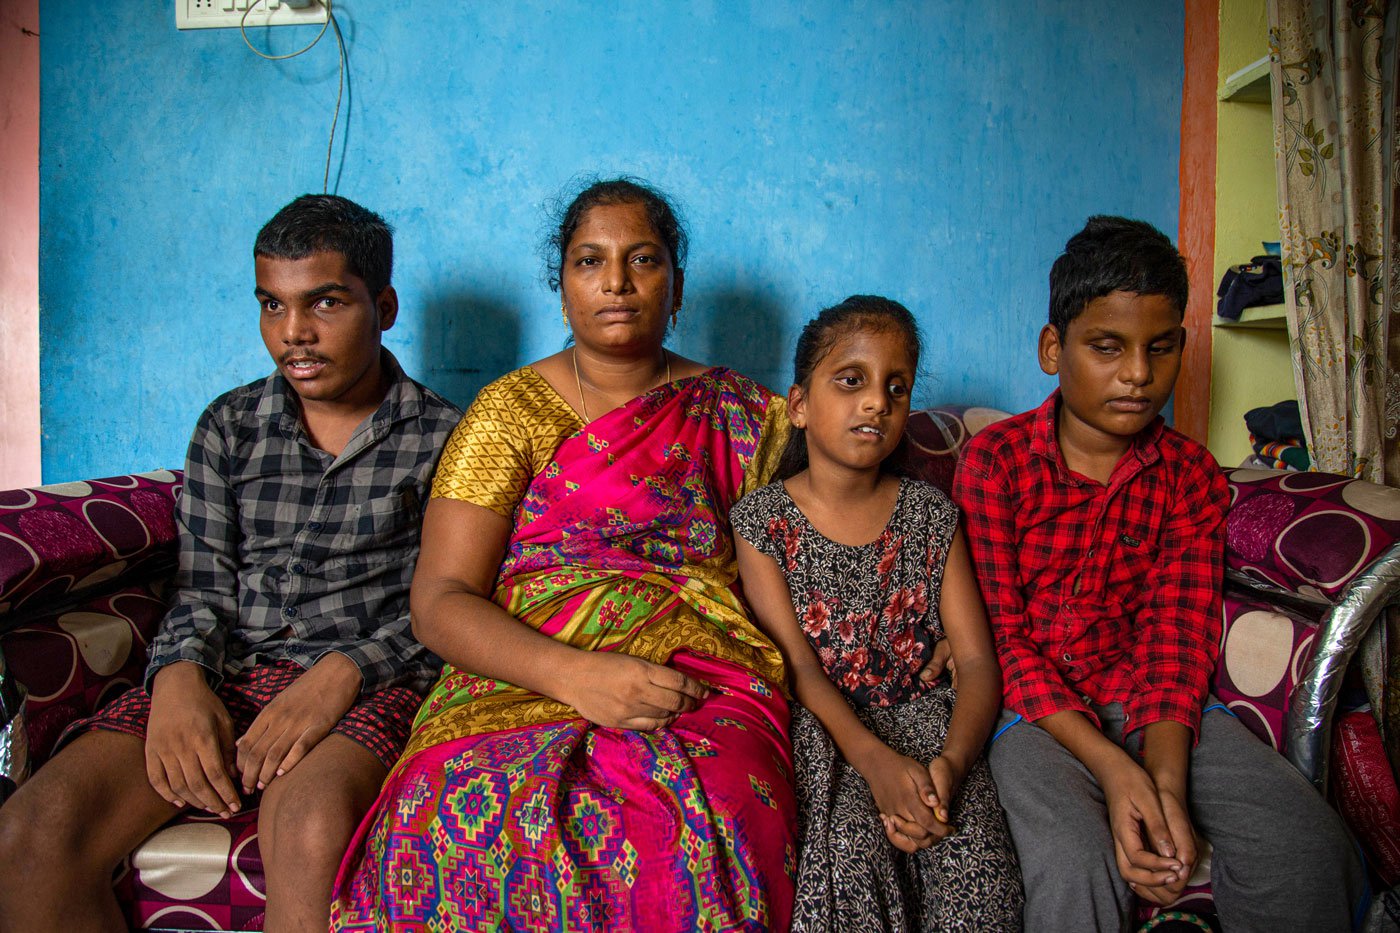 Saranya with her three children, M. Meshak, M. Lebana and M. Manase (from left to right), at their house in Gummidipoondi, Tamil Nadu